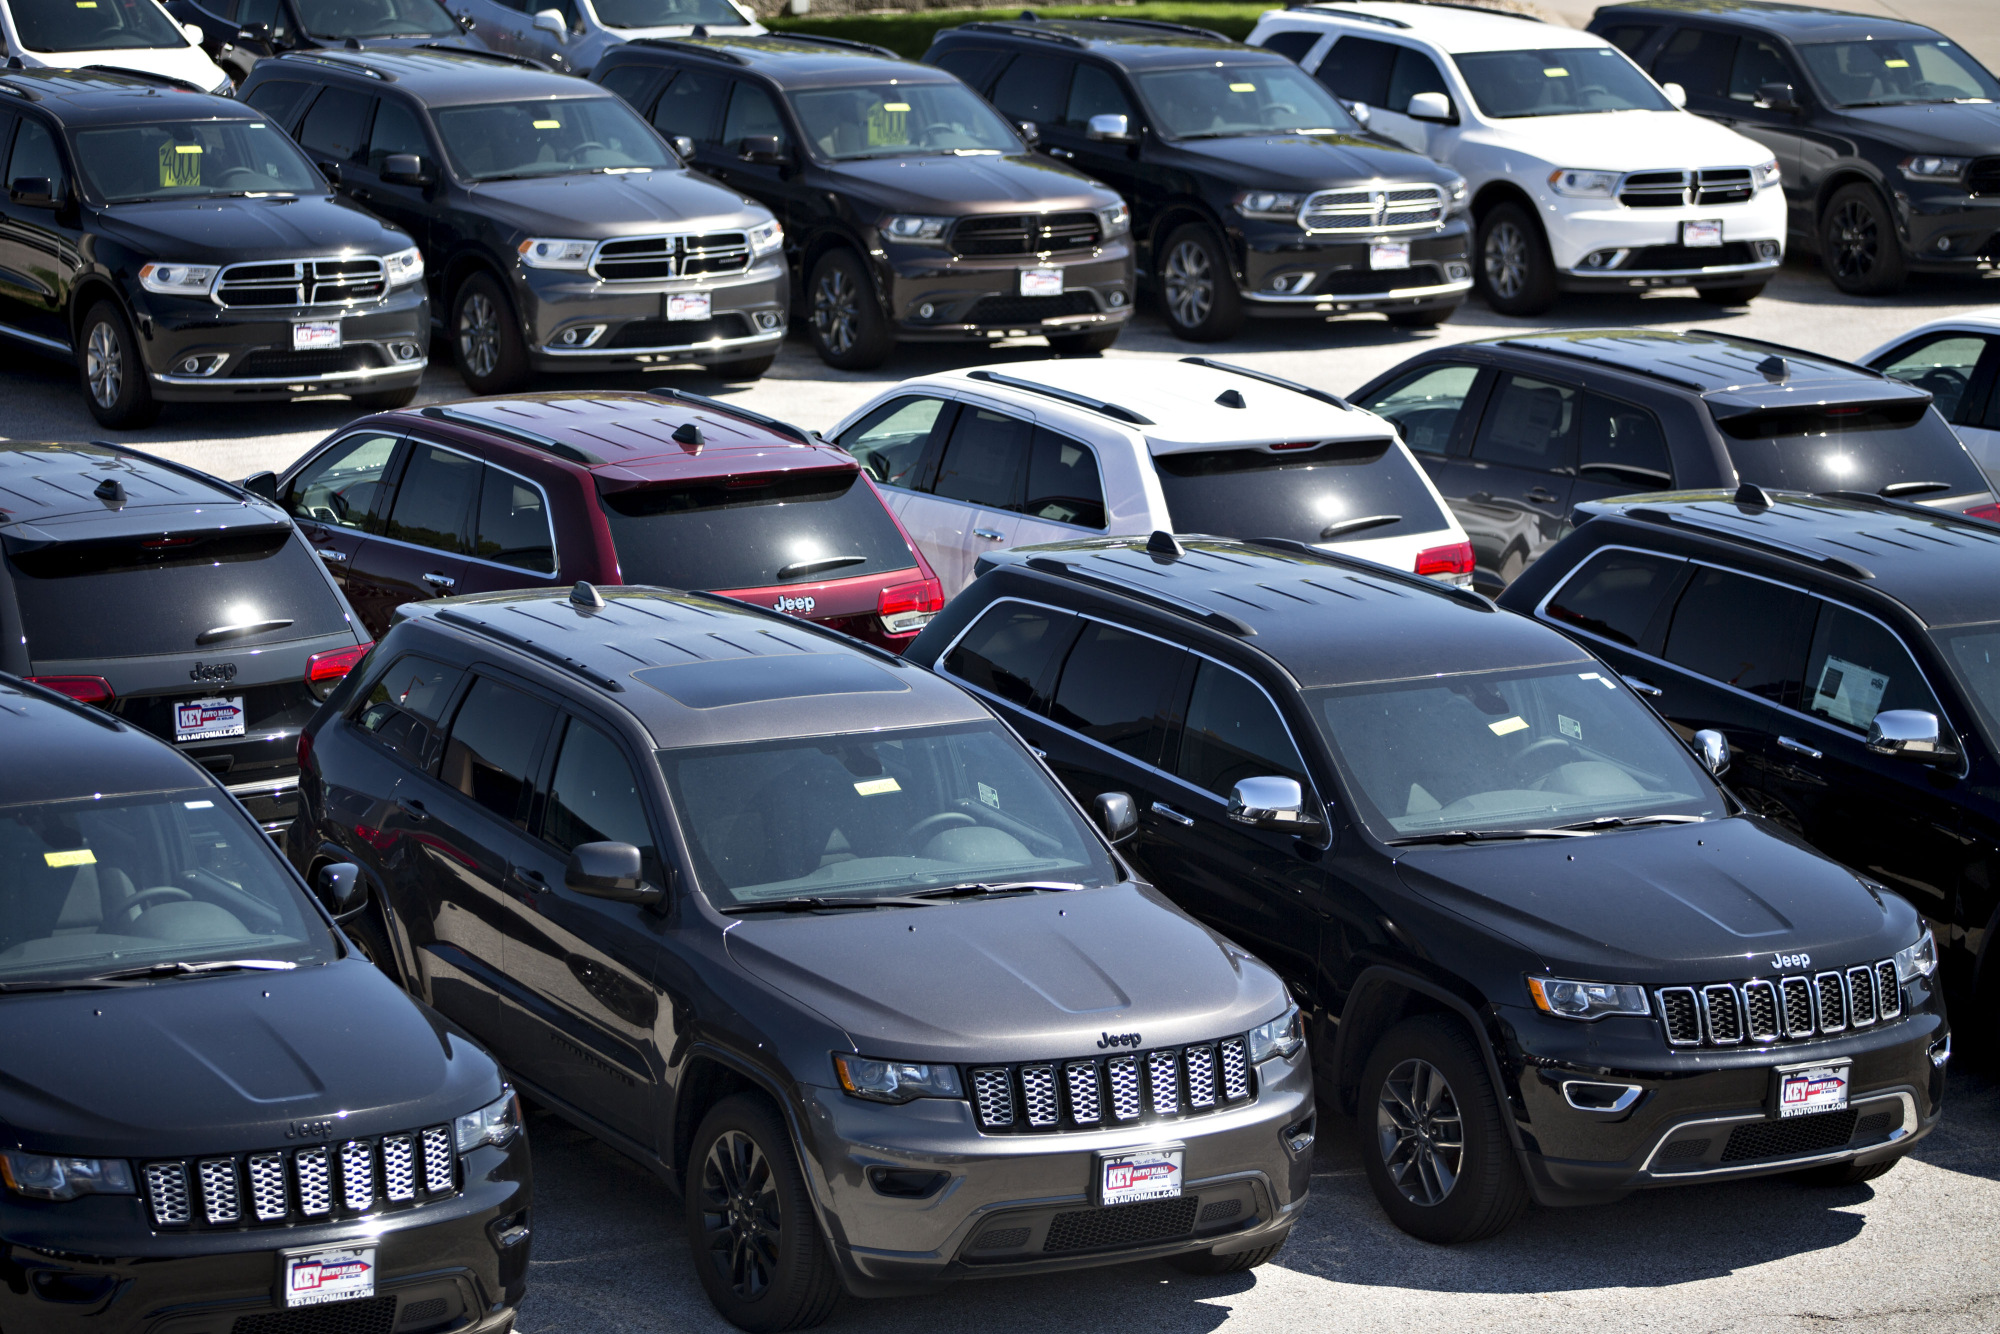 Jeep and Dodge vehicles are displayed for sale at a Fiat Chrysler Automobiles (FCA) car dealership in Moline, Illinois.